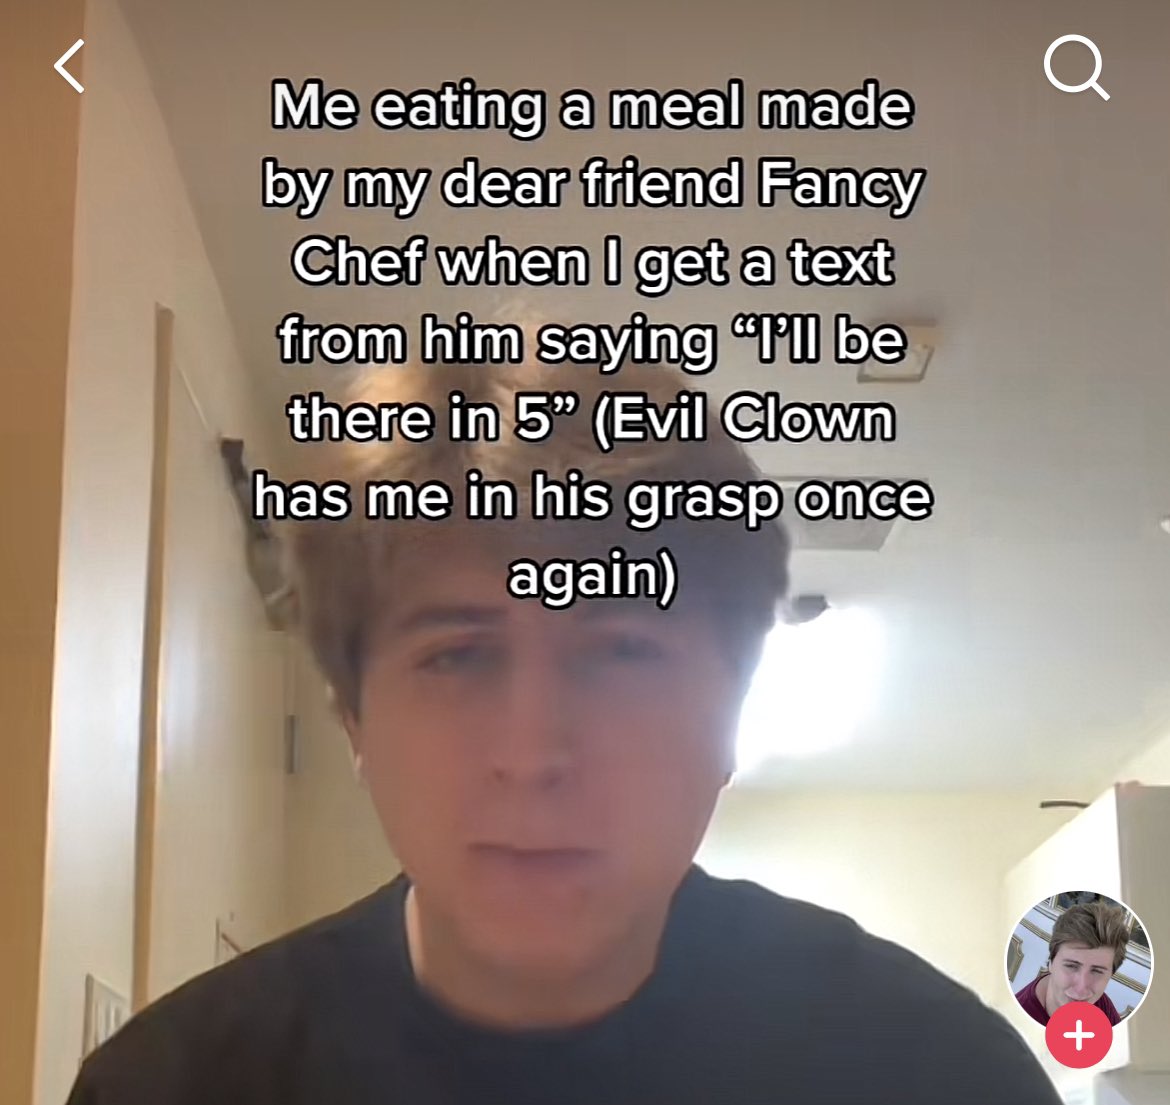 wild tiktok screenshots - photo caption - Me eating a meal made by my dear friend Fancy Chef when I get a text from him saying "I'll be there in 5" Evil Clown has me in his grasp once again Q